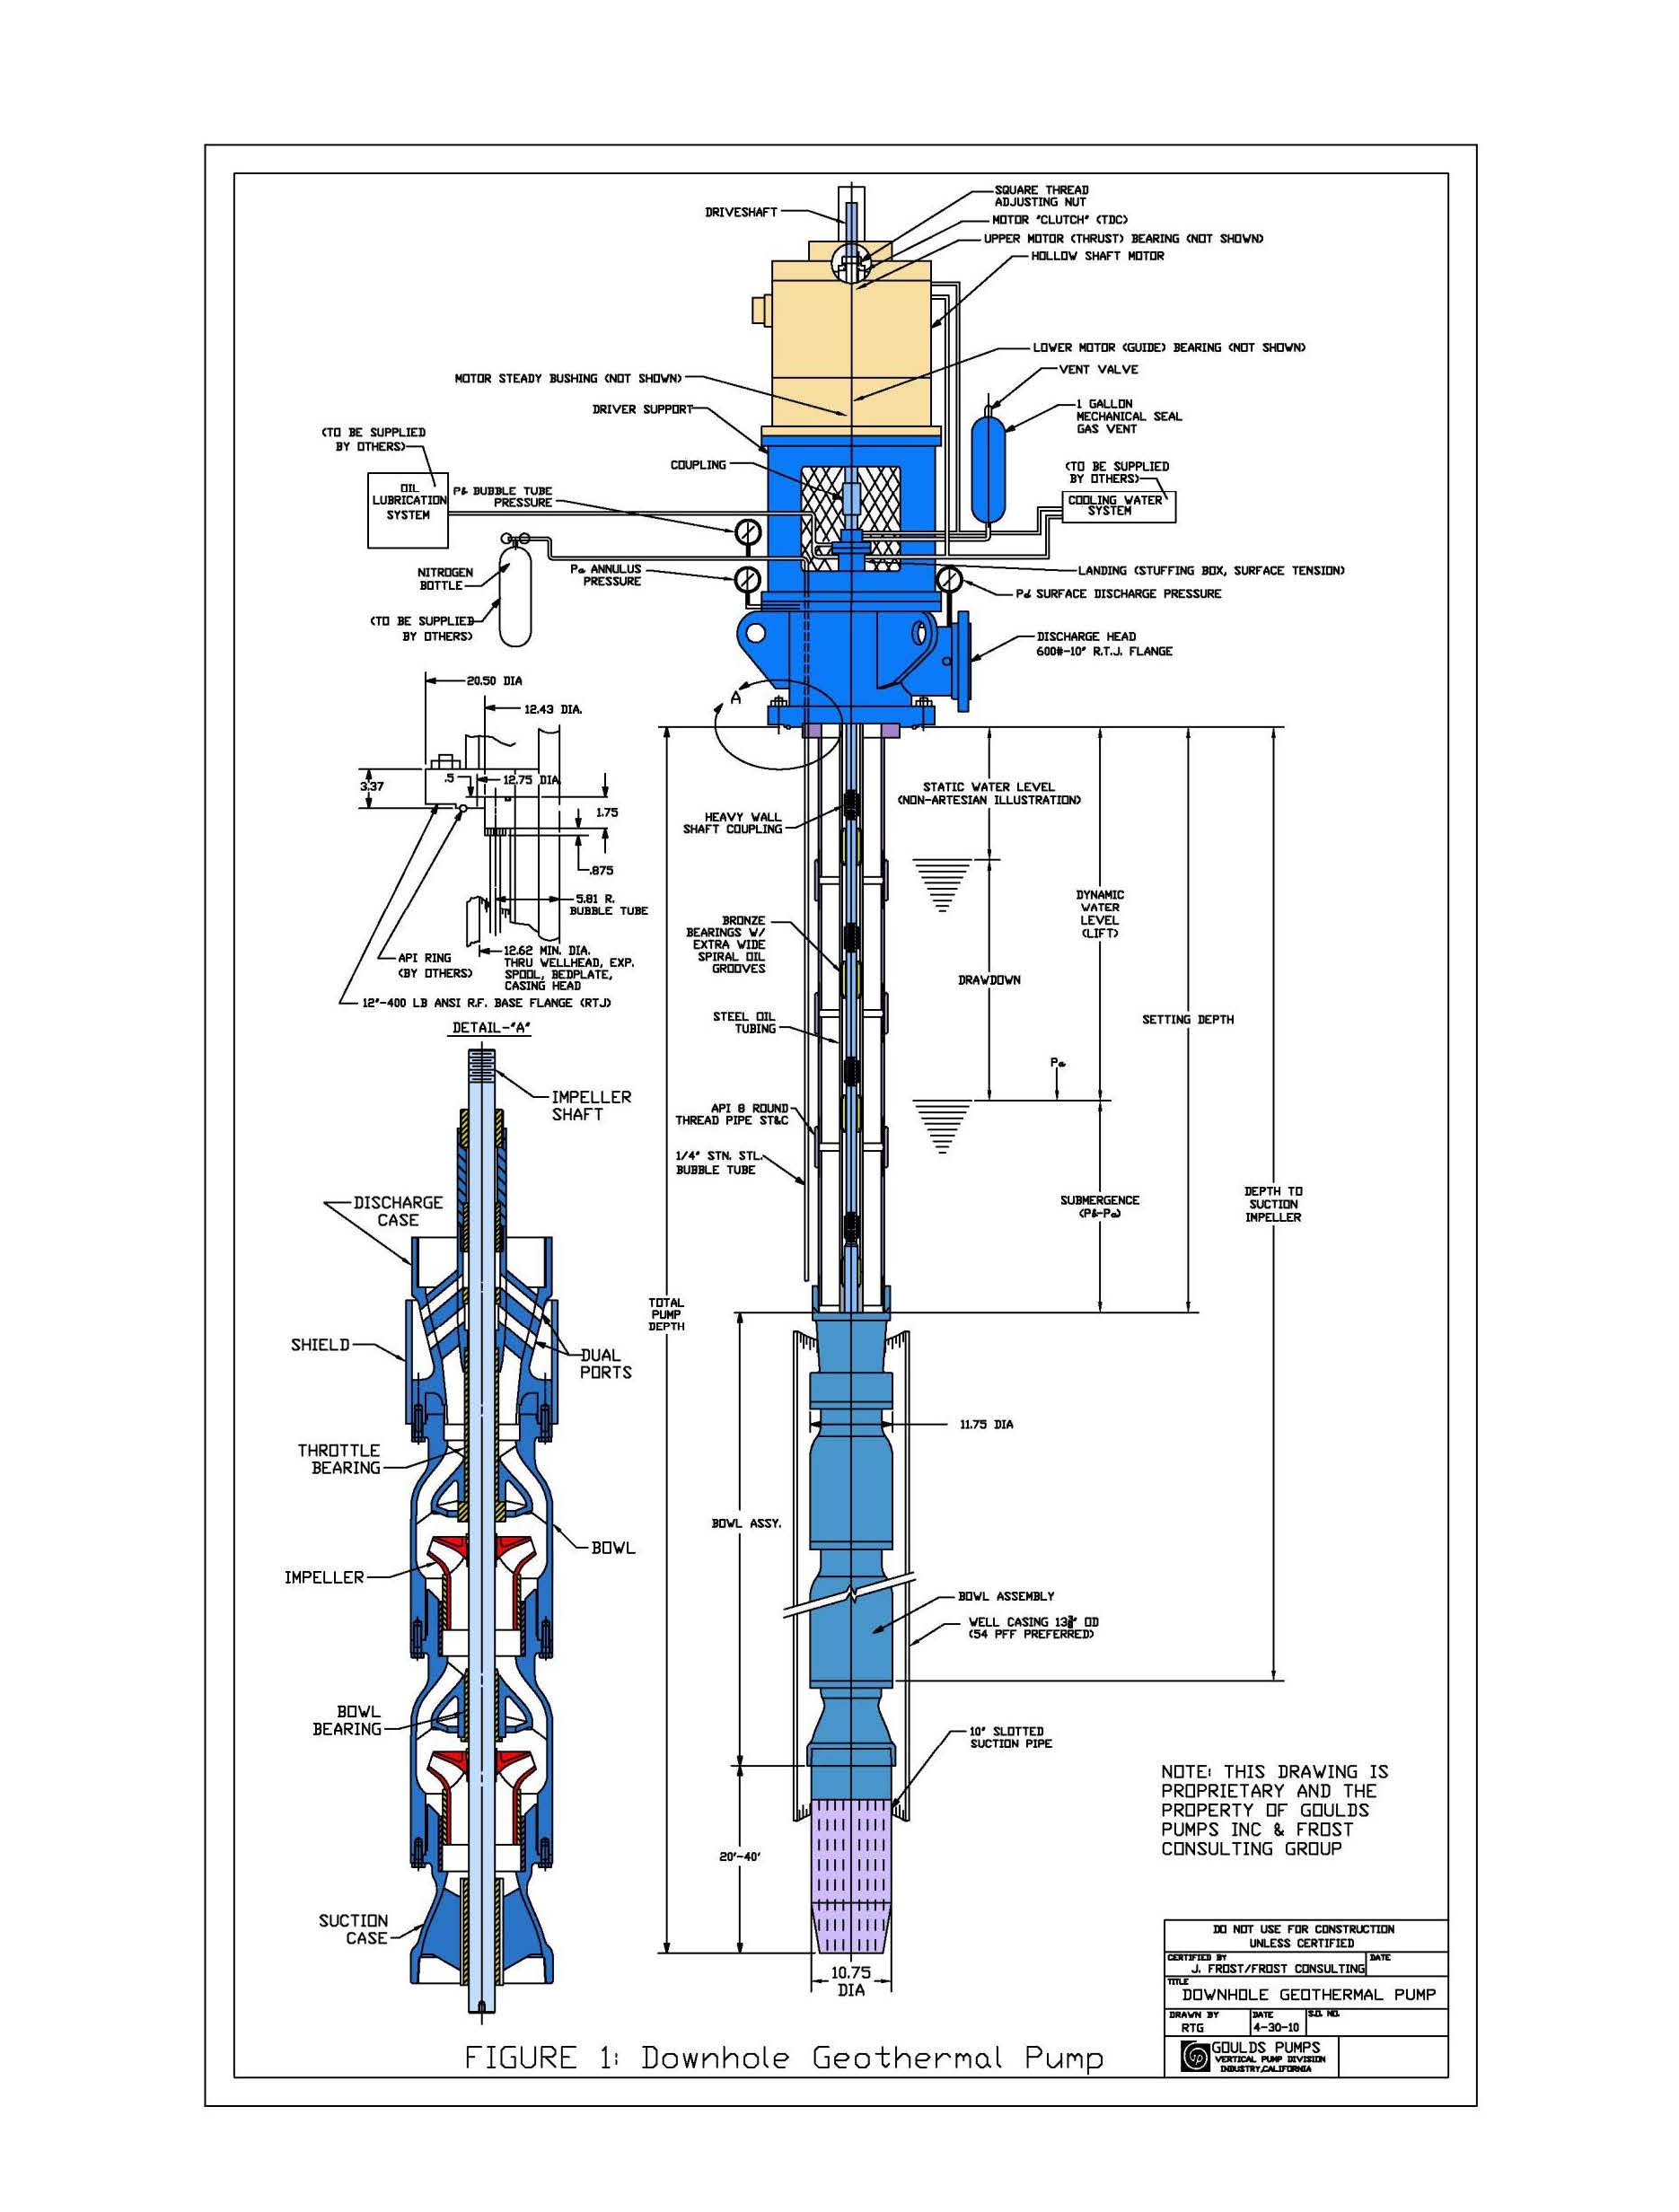 Introduction to Downhole Geothermal Pumps_Updated 22118_Page_08.jpg